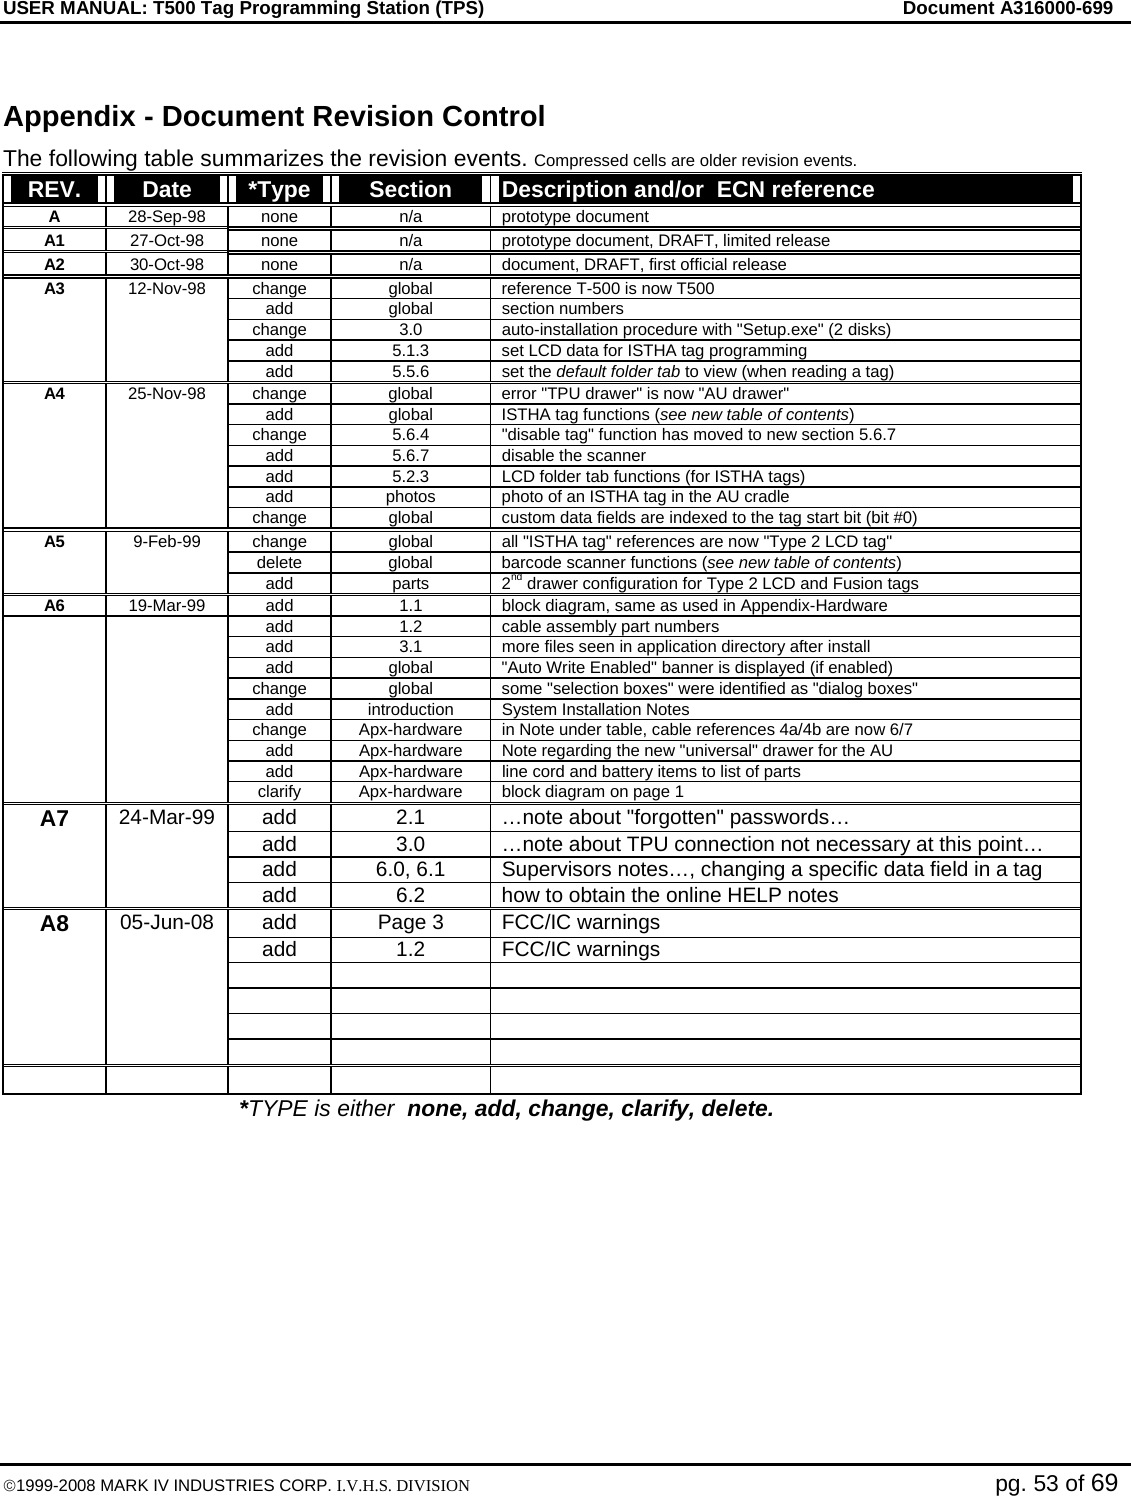 USER MANUAL: T500 Tag Programming Station (TPS)     Document A316000-699  ©1999-2008 MARK IV INDUSTRIES CORP. I.V.H.S. DIVISION   pg. 53 of 69  Appendix - Document Revision Control The following table summarizes the revision events. Compressed cells are older revision events. REV.  Date  *Type  Section  Description and/or  ECN reference A  28-Sep-98 none  n/a  prototype document A1  27-Oct-98  none  n/a  prototype document, DRAFT, limited release A2  30-Oct-98 none  n/a  document, DRAFT, first official release A3  12-Nov-98  change  global  reference T-500 is now T500   add global section numbers    change  3.0  auto-installation procedure with &quot;Setup.exe&quot; (2 disks)    add  5.1.3  set LCD data for ISTHA tag programming   add 5.5.6 set the default folder tab to view (when reading a tag) A4  25-Nov-98  change  global  error &quot;TPU drawer&quot; is now &quot;AU drawer&quot;    add  global  ISTHA tag functions (see new table of contents)    change  5.6.4  &quot;disable tag&quot; function has moved to new section 5.6.7    add  5.6.7  disable the scanner    add  5.2.3  LCD folder tab functions (for ISTHA tags)    add  photos  photo of an ISTHA tag in the AU cradle    change  global  custom data fields are indexed to the tag start bit (bit #0) A5  9-Feb-99  change  global  all &quot;ISTHA tag&quot; references are now &quot;Type 2 LCD tag&quot;   delete global barcode scanner functions (see new table of contents)   add parts 2nd drawer configuration for Type 2 LCD and Fusion tags A6  19-Mar-99  add  1.1  block diagram, same as used in Appendix-Hardware    add  1.2  cable assembly part numbers    add  3.1  more files seen in application directory after install    add  global  &quot;Auto Write Enabled&quot; banner is displayed (if enabled)   change global some &quot;selection boxes&quot; were identified as &quot;dialog boxes&quot;    add  introduction  System Installation Notes    change  Apx-hardware  in Note under table, cable references 4a/4b are now 6/7    add  Apx-hardware  Note regarding the new &quot;universal&quot; drawer for the AU    add  Apx-hardware  line cord and battery items to list of parts    clarify  Apx-hardware  block diagram on page 1 A7  24-Mar-99  add  2.1  …note about &quot;forgotten&quot; passwords…    add  3.0  …note about TPU connection not necessary at this point…    add  6.0, 6.1  Supervisors notes…, changing a specific data field in a tag    add  6.2  how to obtain the online HELP notes A8  05-Jun-08  add  Page 3  FCC/IC warnings   add  1.2 FCC/IC warnings                                 *TYPE is either  none, add, change, clarify, delete.  